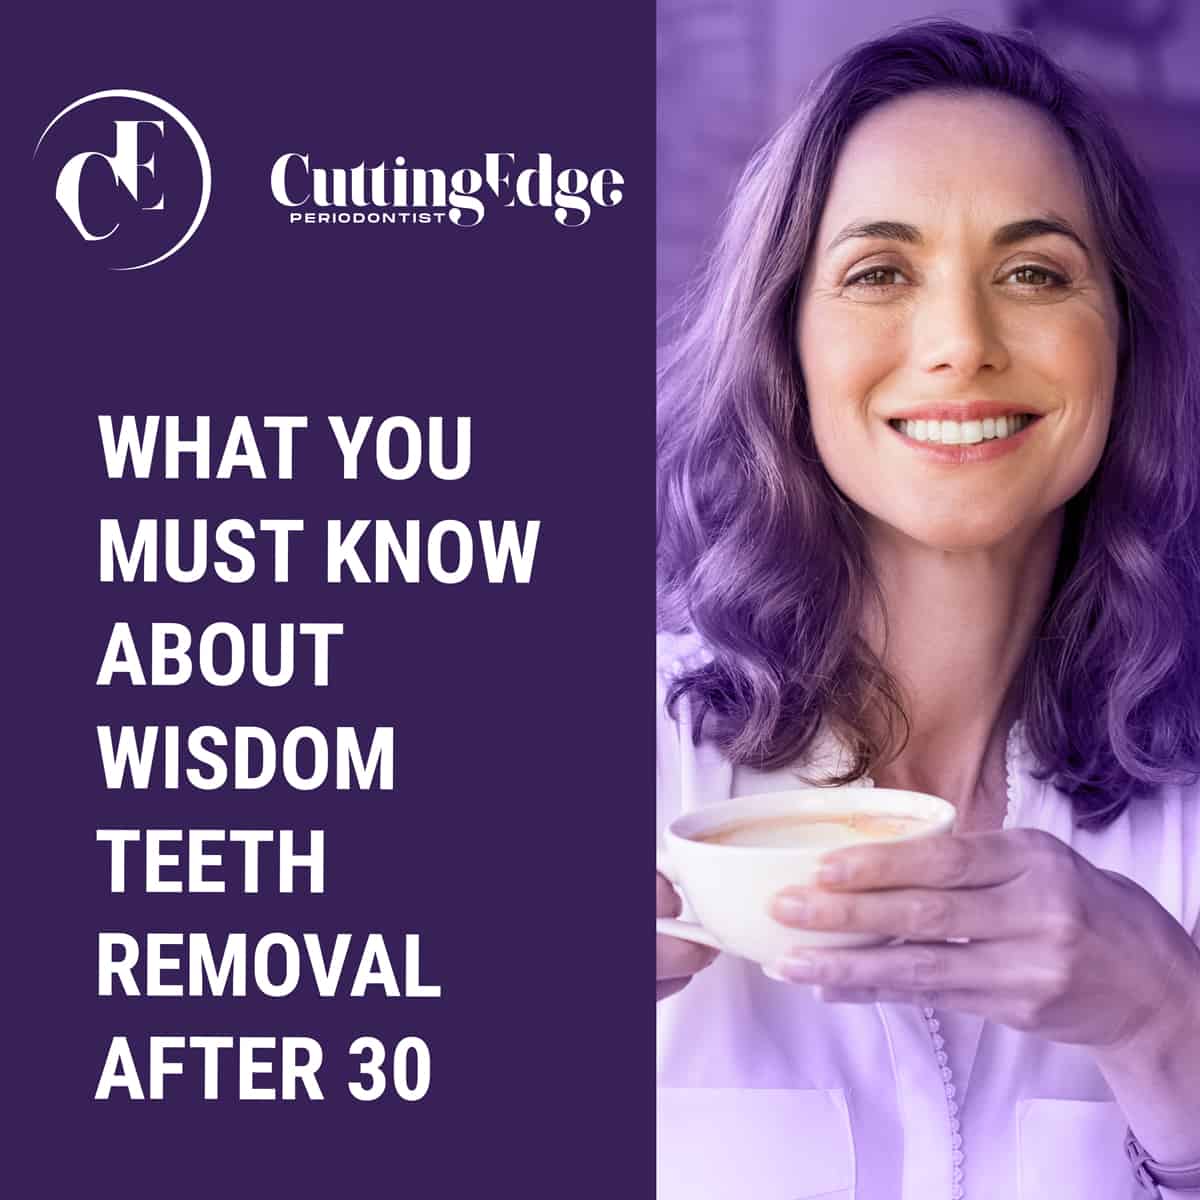 What You Must Know About Wisdom Teeth Removal After 30